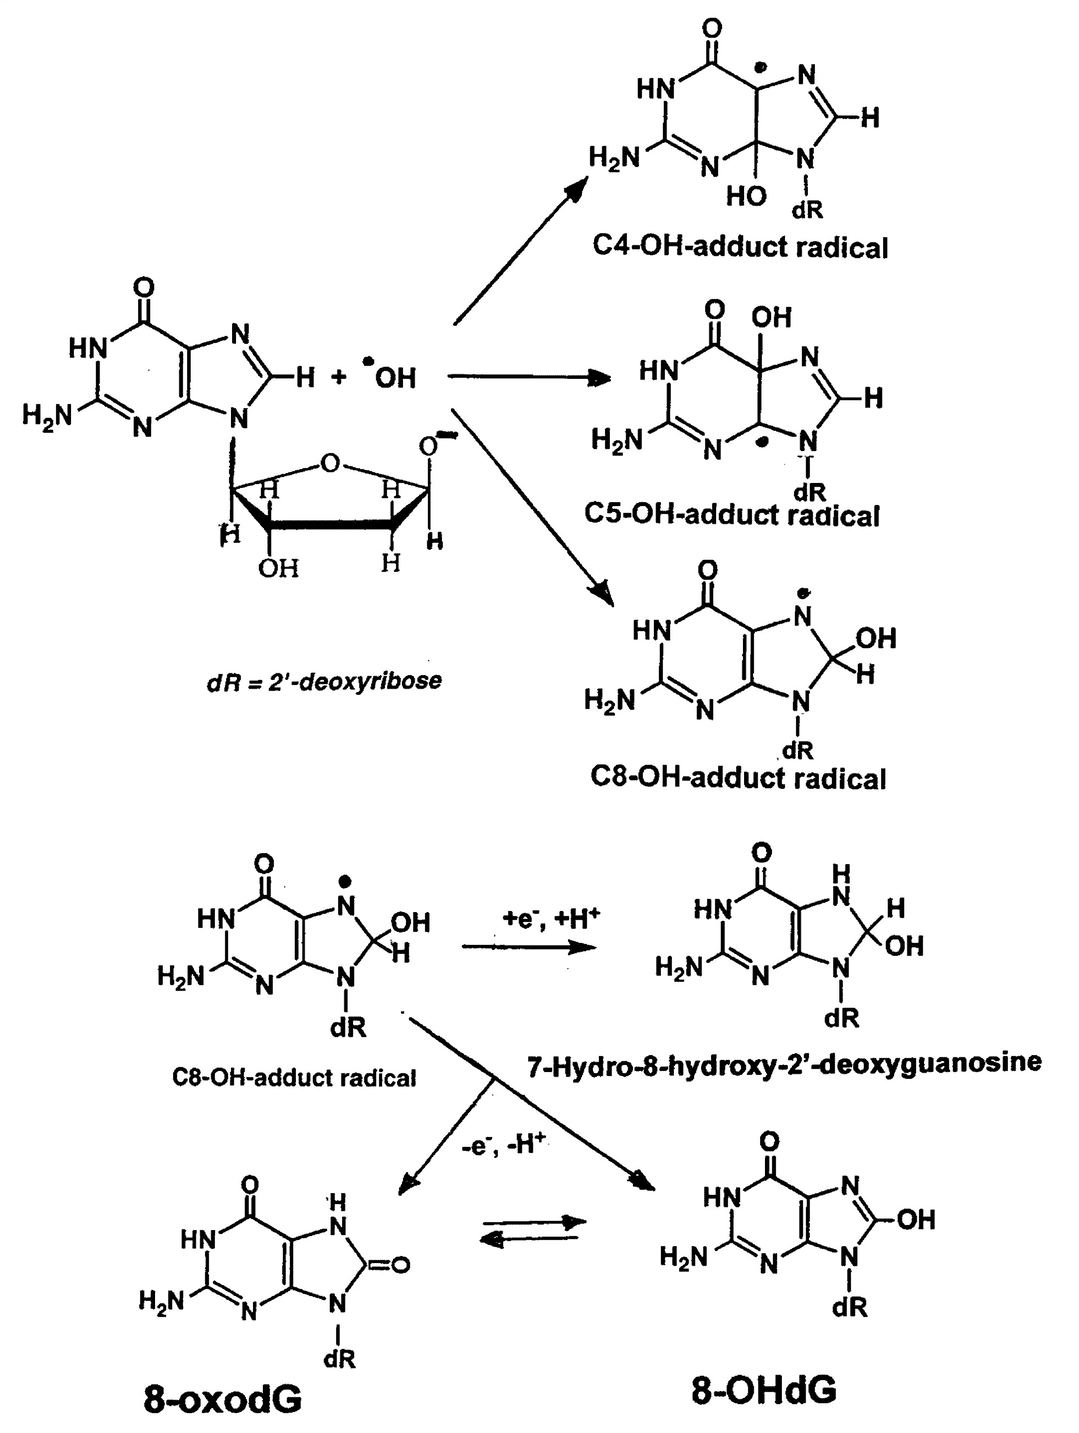 Reaction of 2-deoxyguanosine with hydroxyl radicals, radical adducts followed by reduction to 7-hydro-8-hydroxy-2-deoxyguanosine, and by 8-OHd or its tautomer, 8-oxodG.